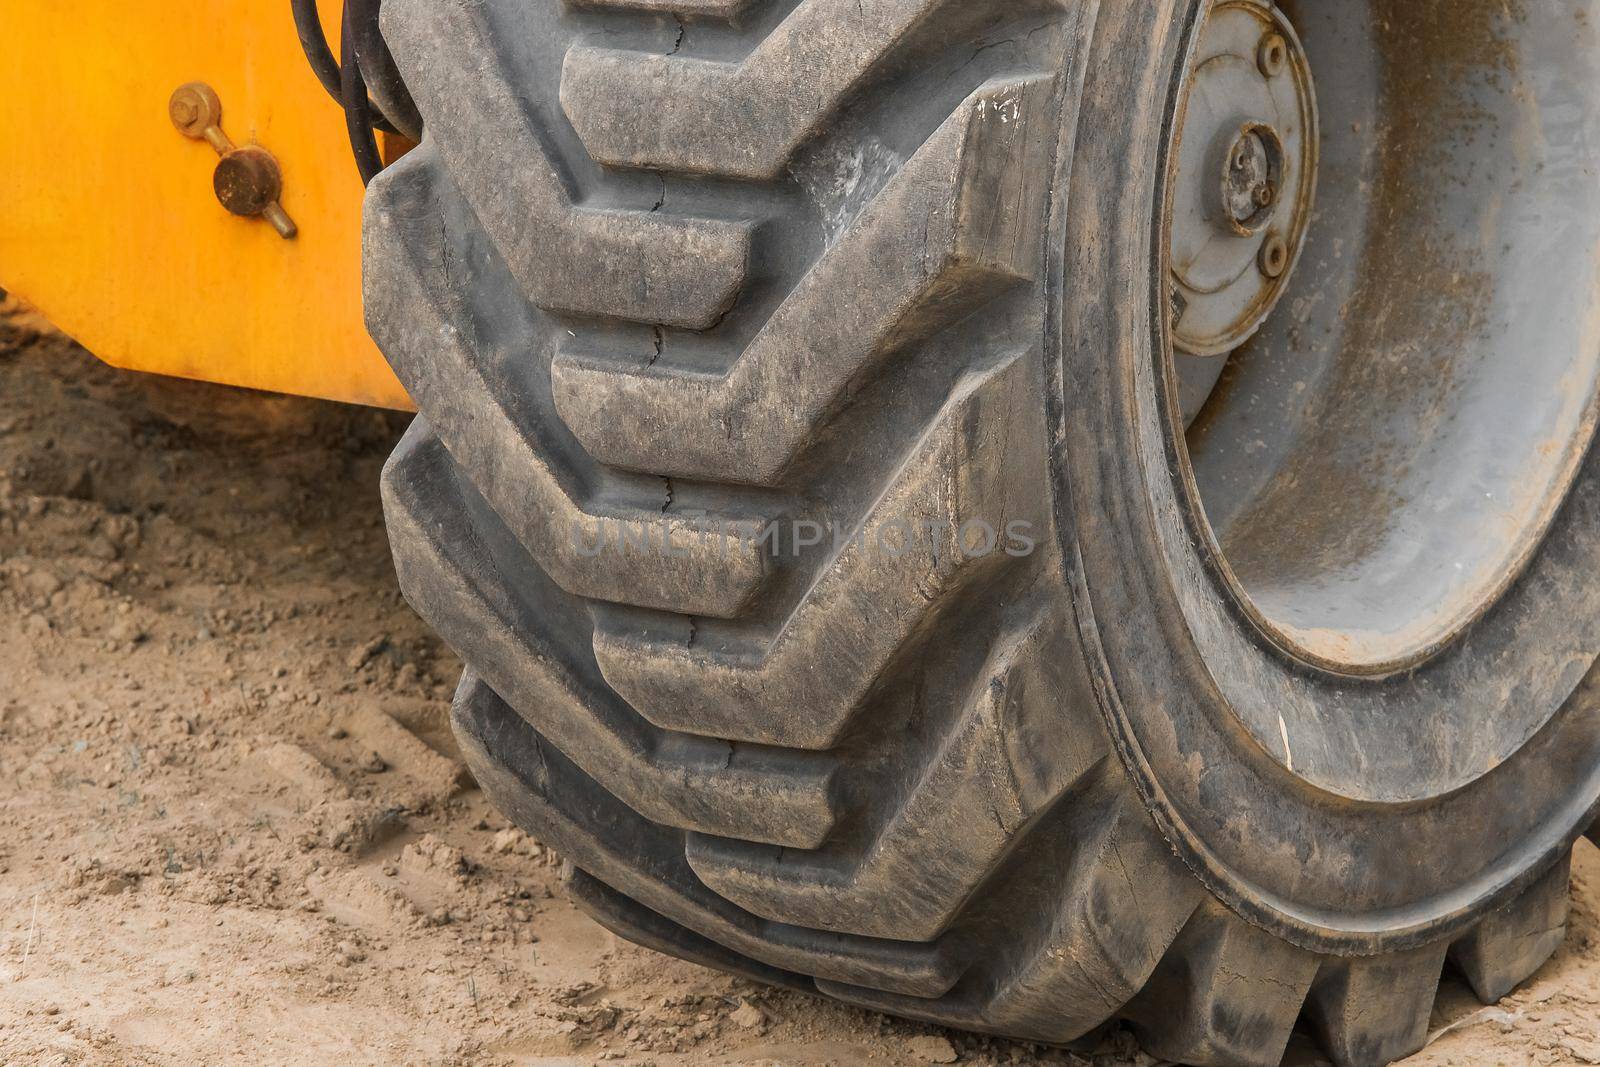 Wheels of industrial lifting transport tire truck against the background of sand at a construction site.